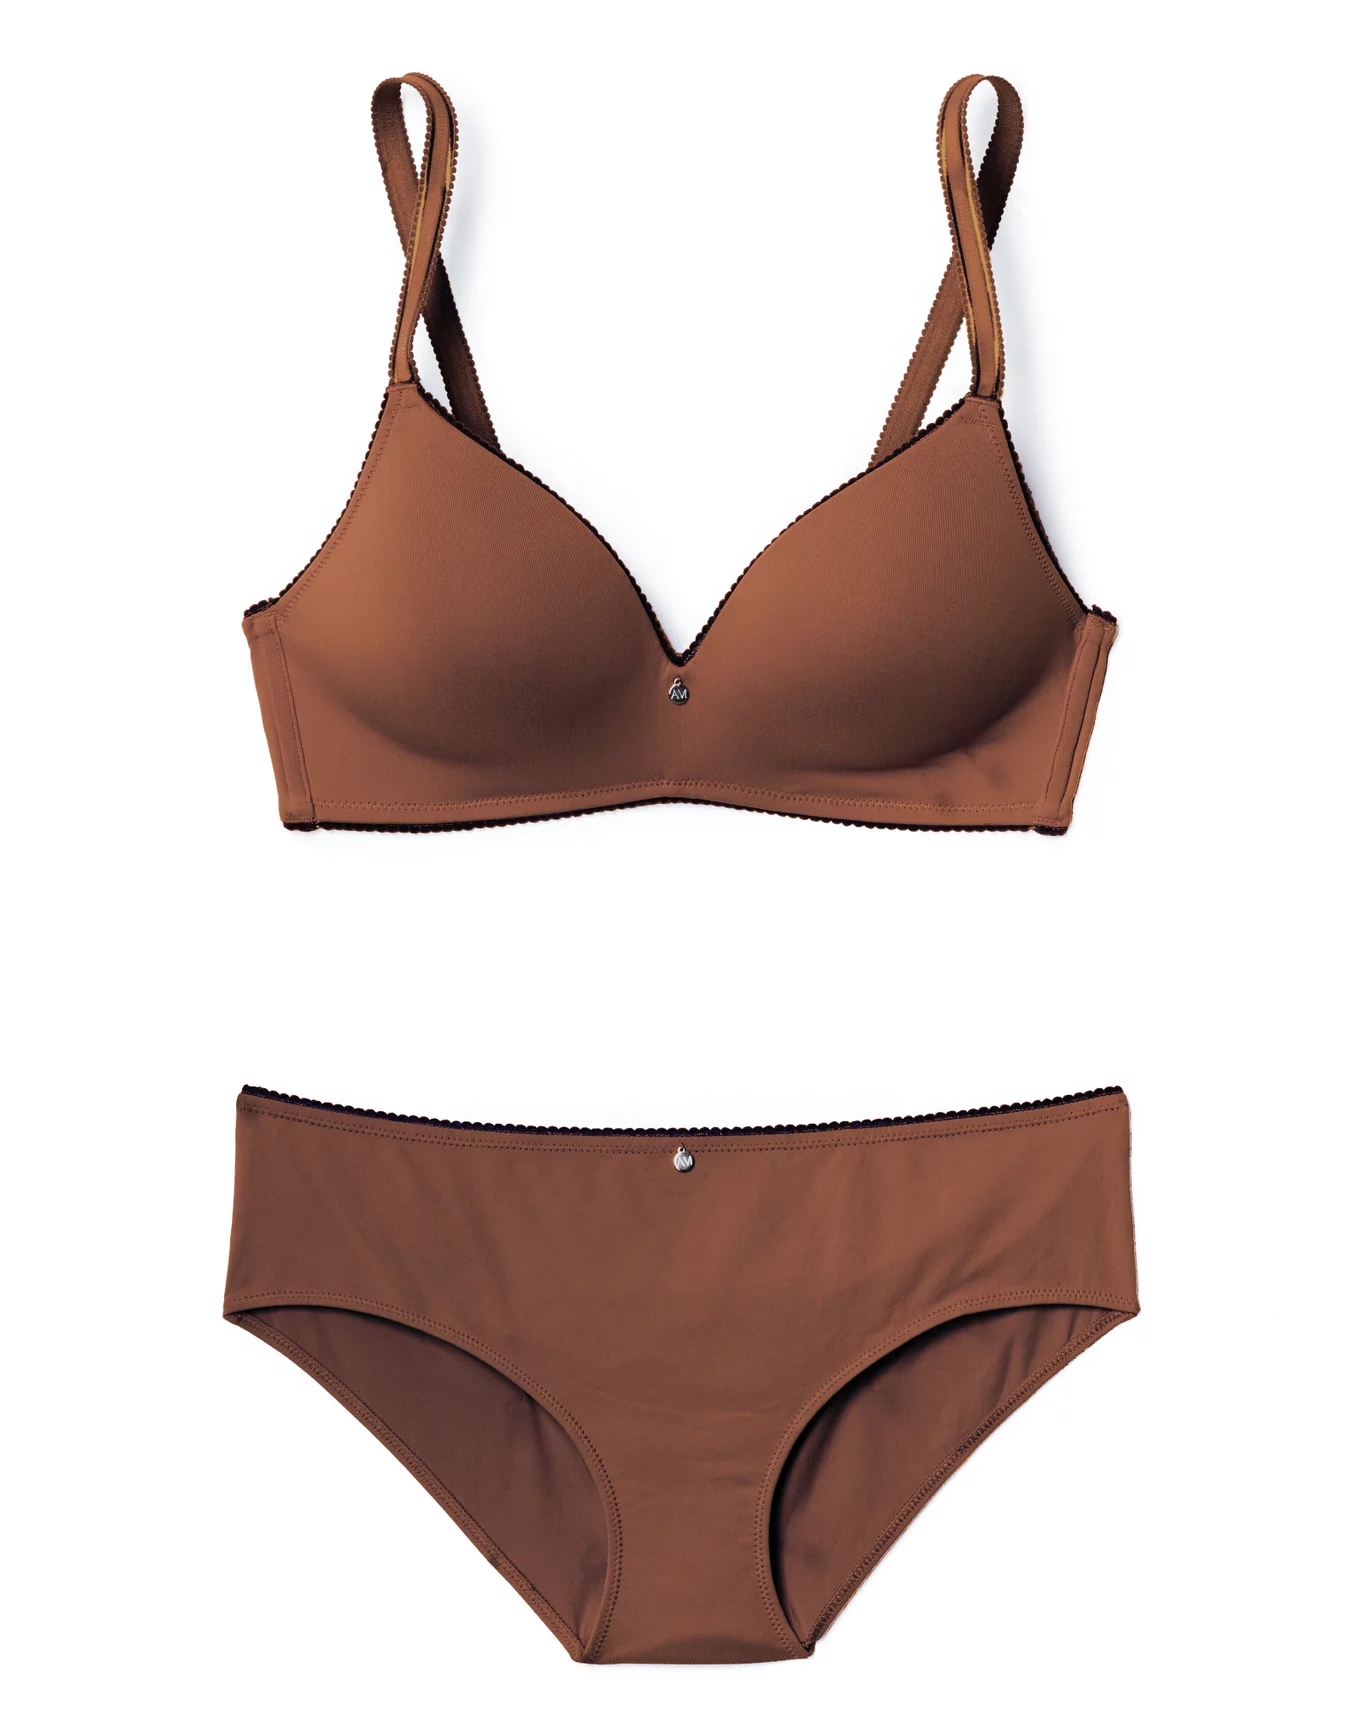 Shop for K CUP, Brown, Lingerie